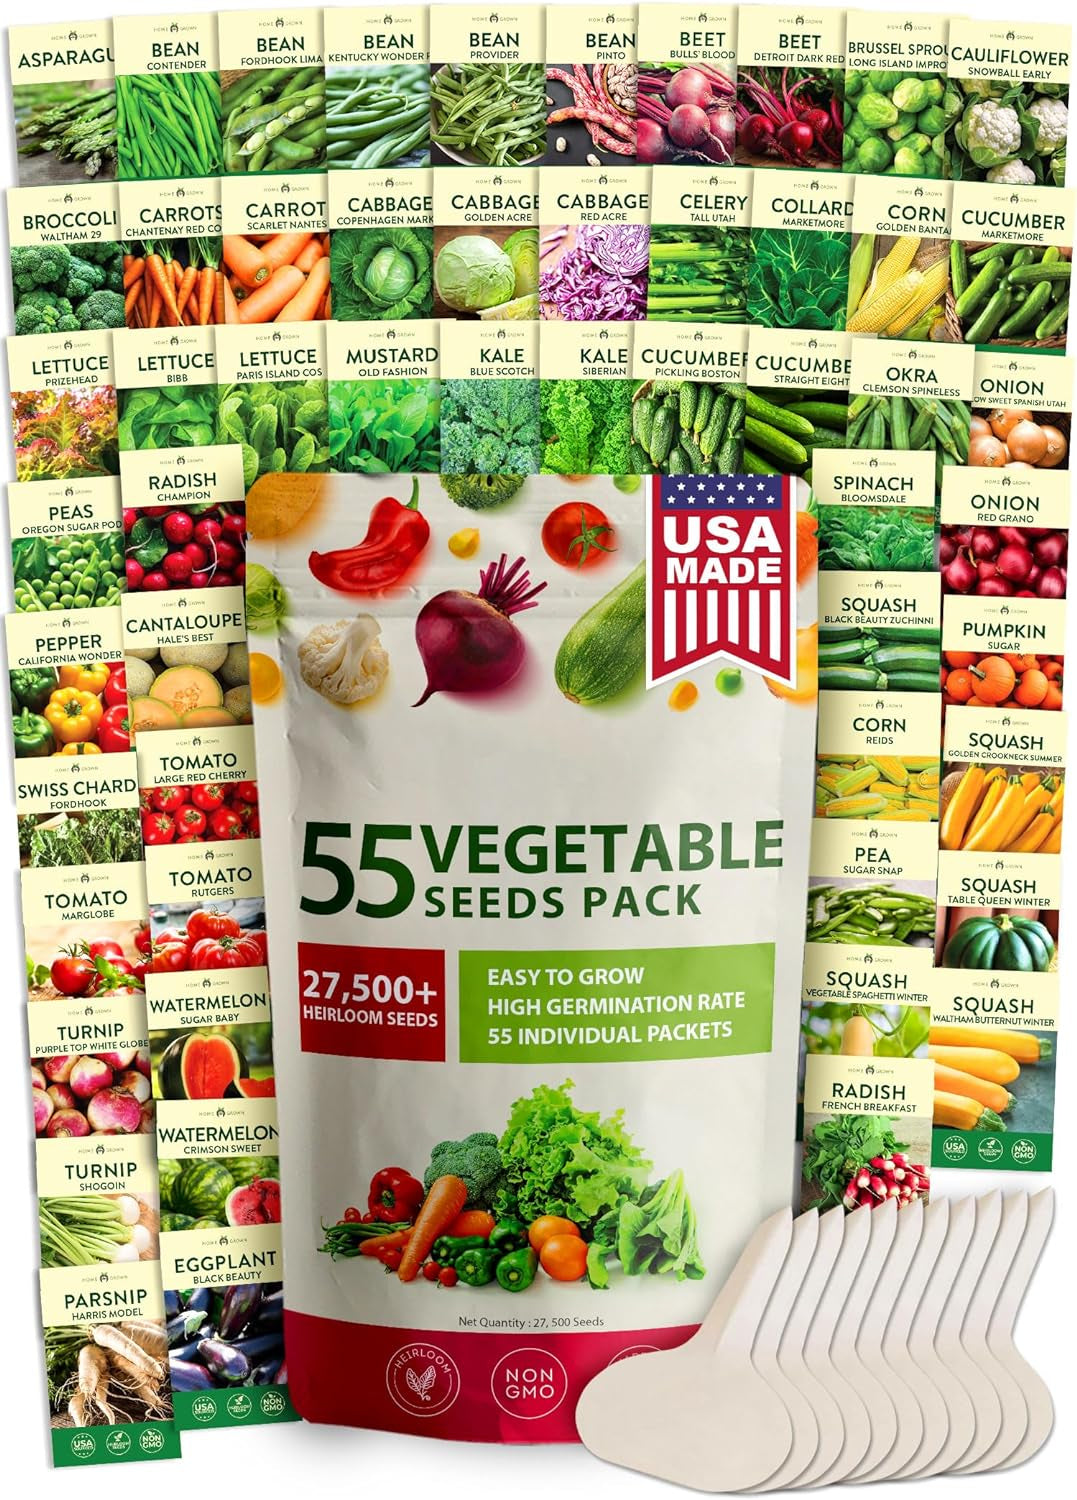 27,500+ Heirloom Vegetable Seeds | Non GMO Garden Seed 55 Variety Pack | Gardening Seeds for Planting Vegetables and Fruits, & Lettuce | Prepper Supplies | Survival Gear | Spring, Summer, Fall